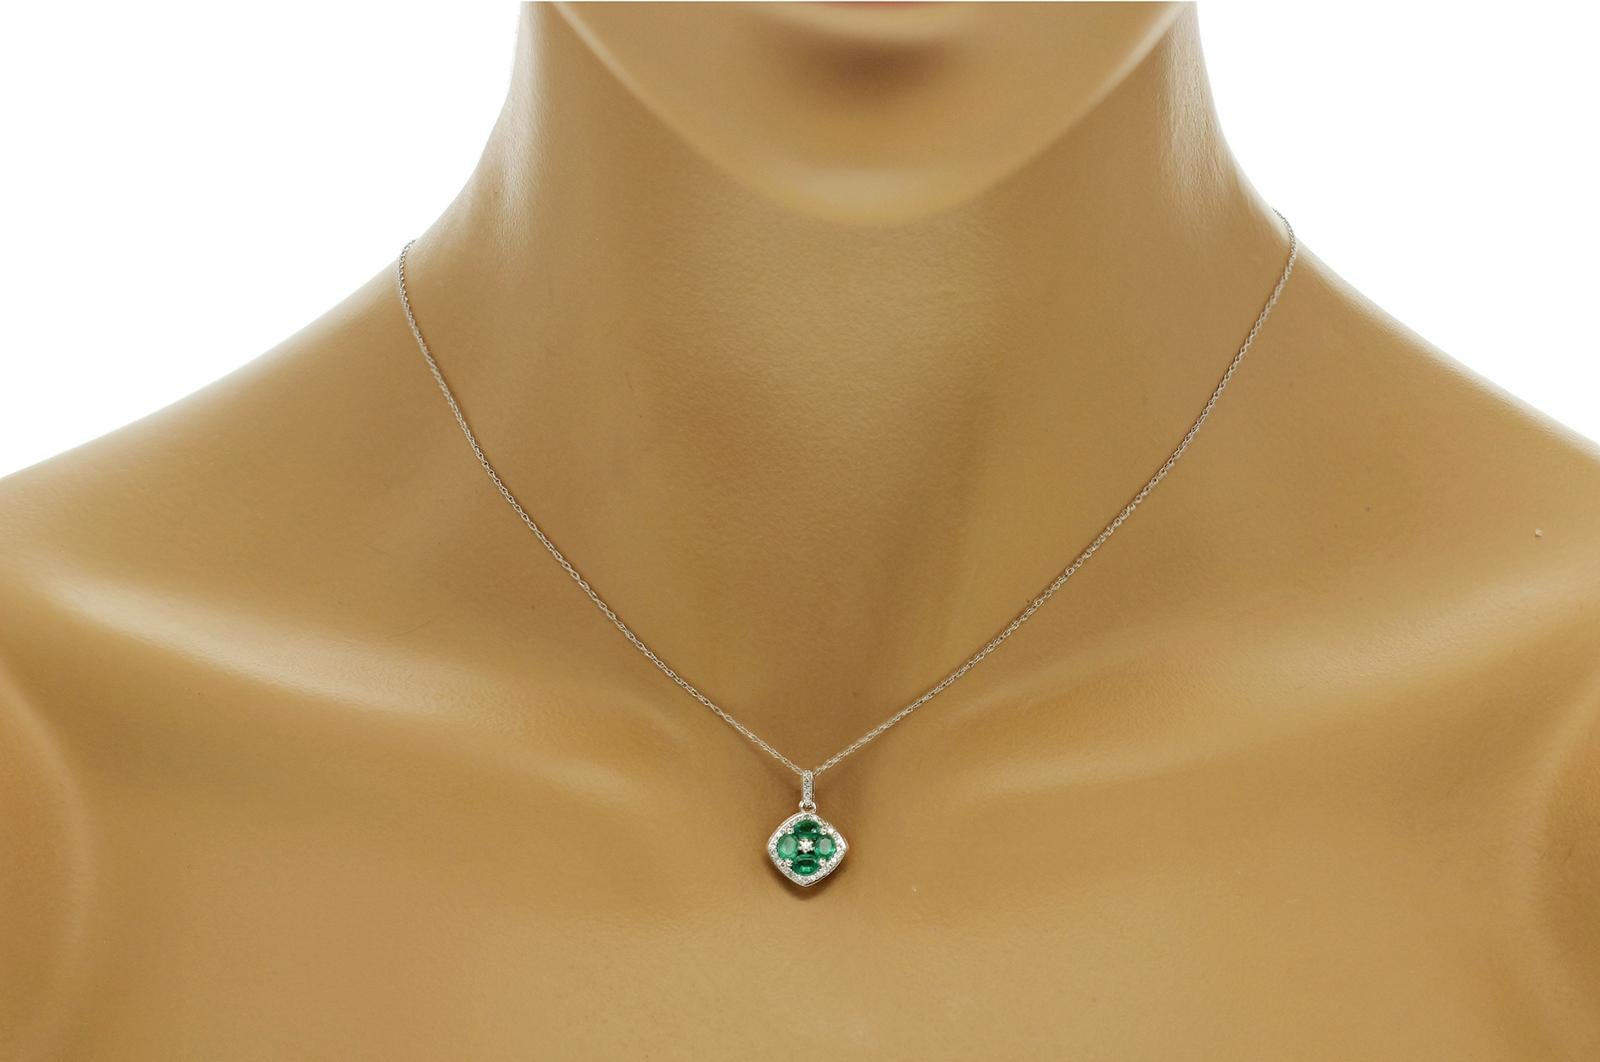 100% Authentic, 100% Customer Satisfaction

Pendant: 12 mm

Chain: 0.5mm

Size: 18 Inches

Metal: 14K White Gold

Hallmarks: 14K

Total Weight: 1.6 Grams

Stone Type: 1.20 CT Natural Emerald &  Diamond 0.15 CT  H  SI1

Condition: New With Tag 